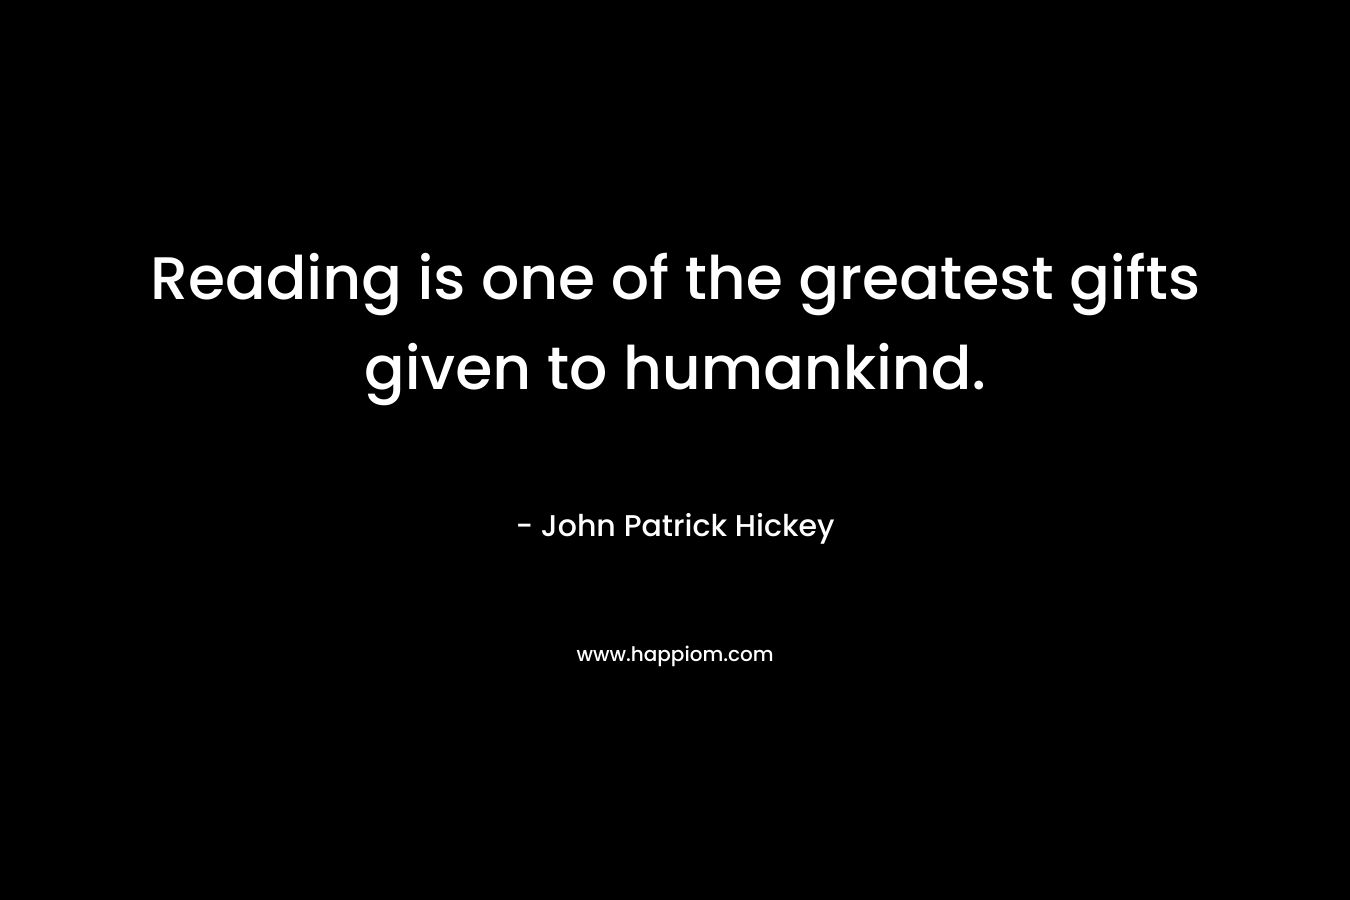 Reading is one of the greatest gifts given to humankind.